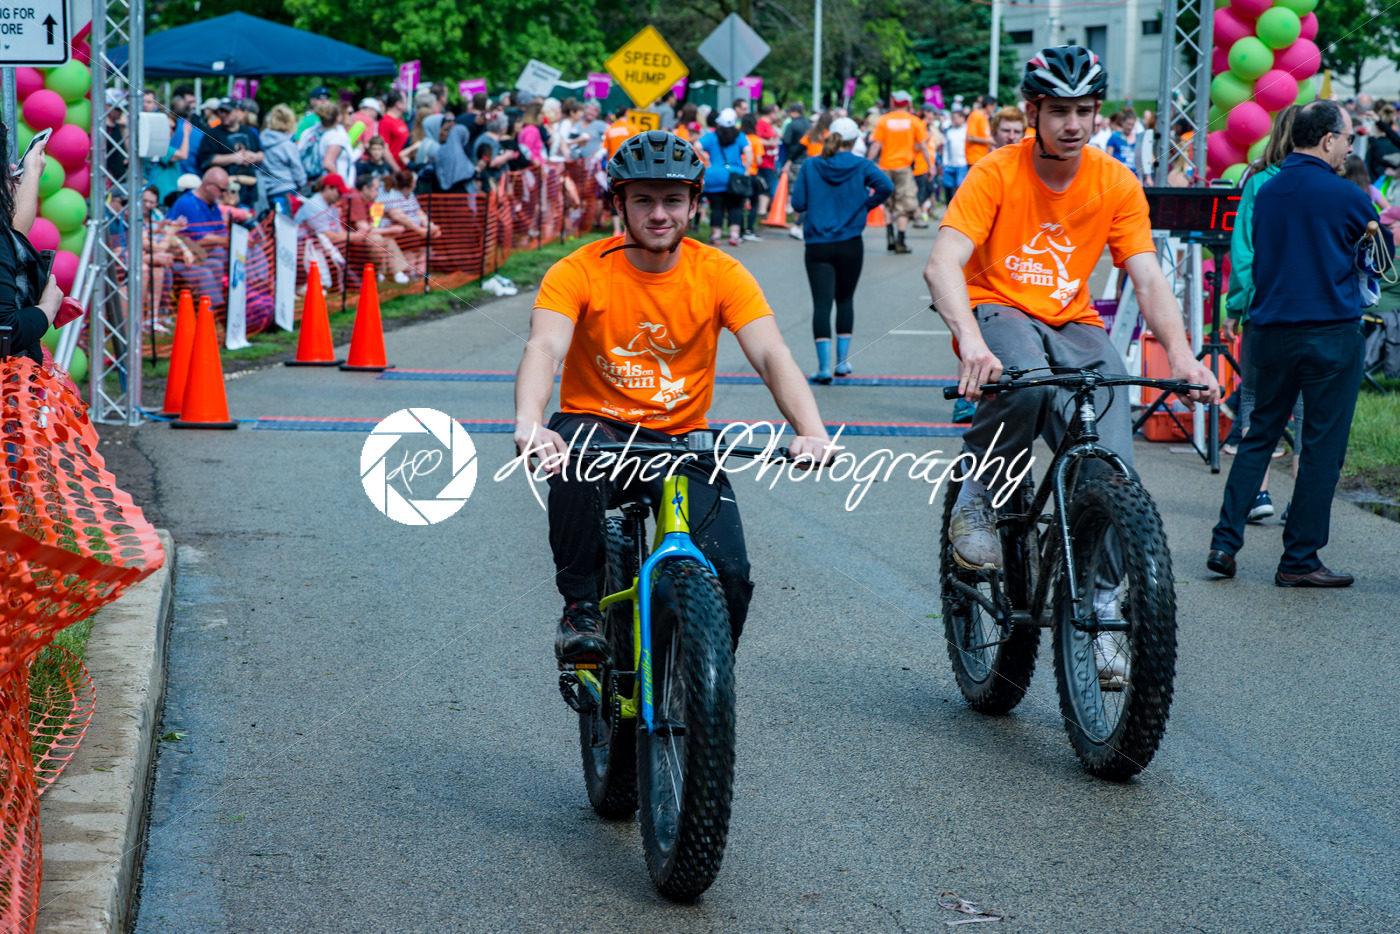 Blue Bell, PA -May 20, 2018: Girls on the Run 5k Start - Kelleher Photography Store